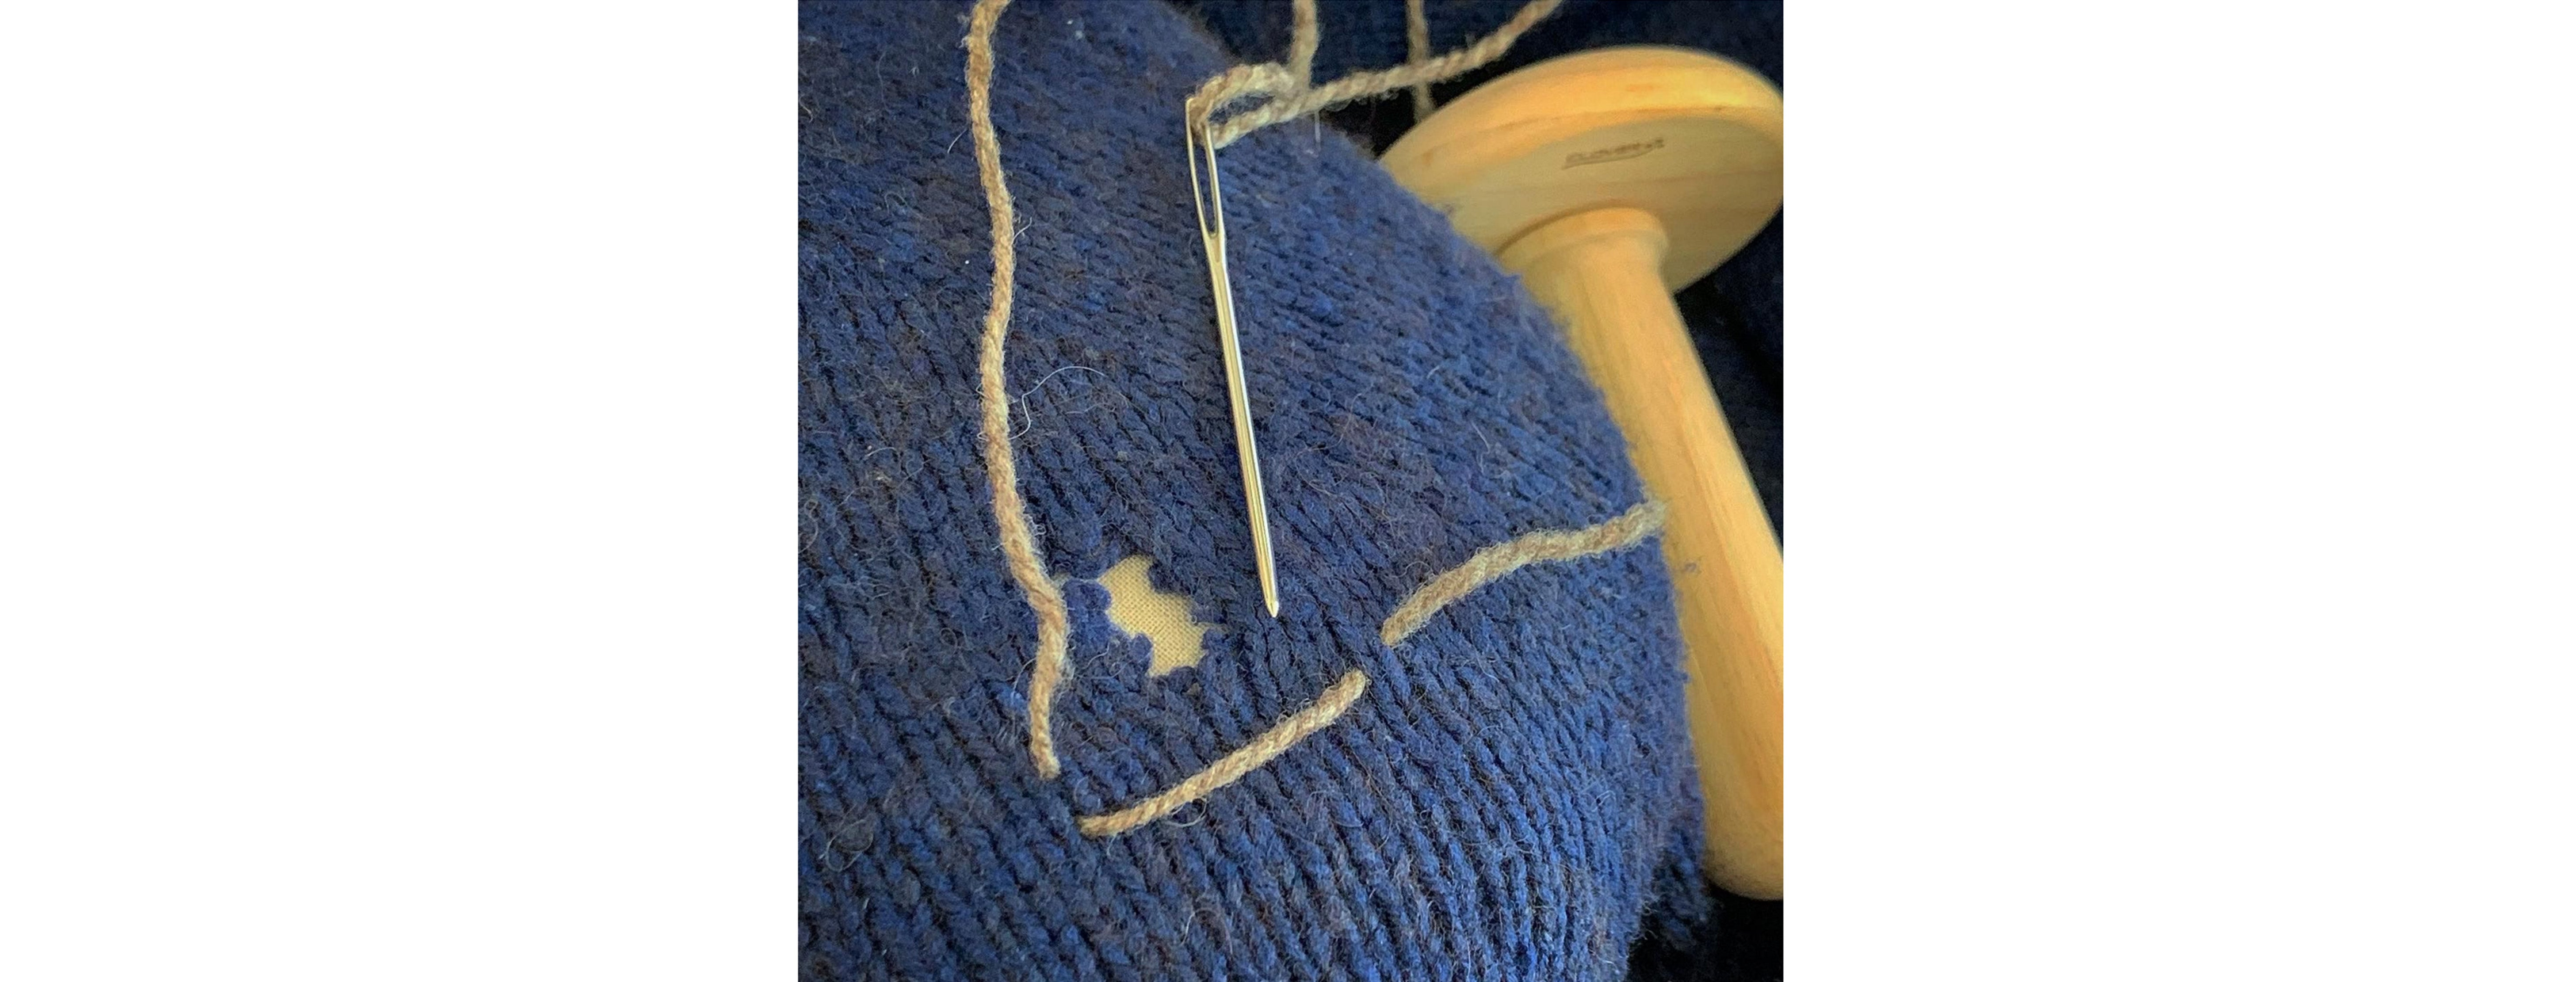 Stretch the damaged area of your knitwear on a smooth surface